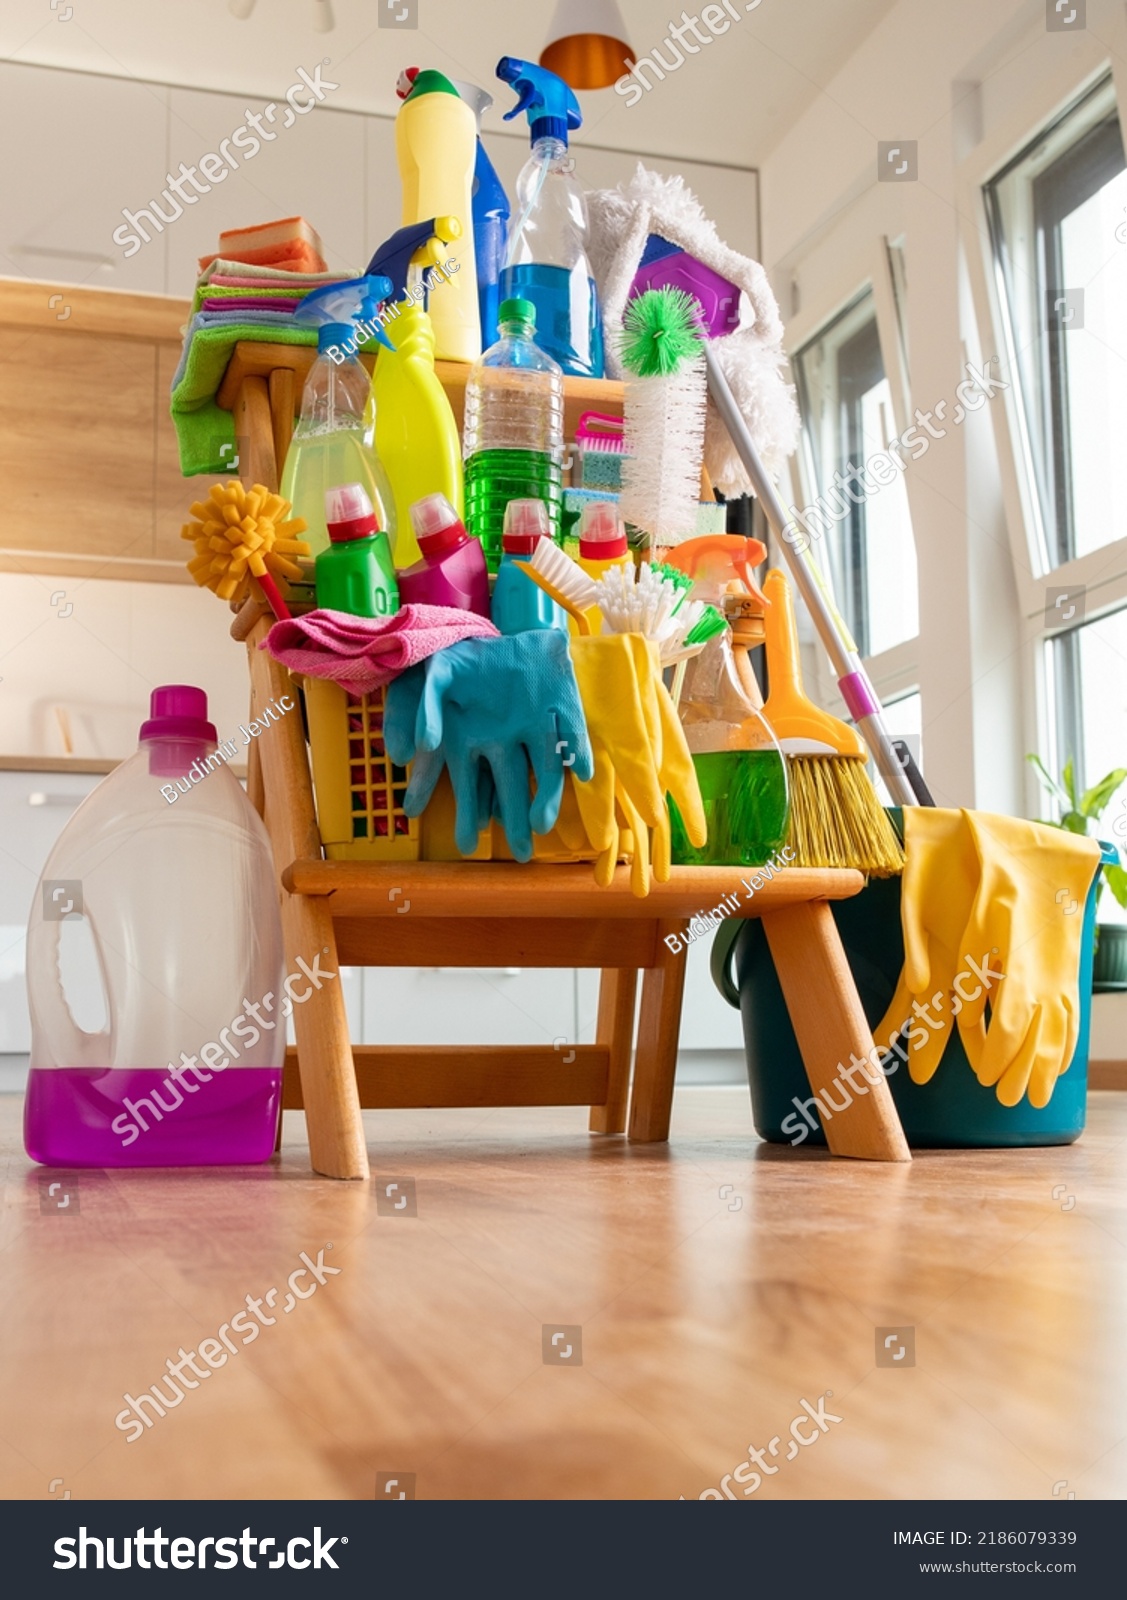 Close up of cleaning products arranged on wooden shelves in front of kitchen. Housekeeping concept #2186079339